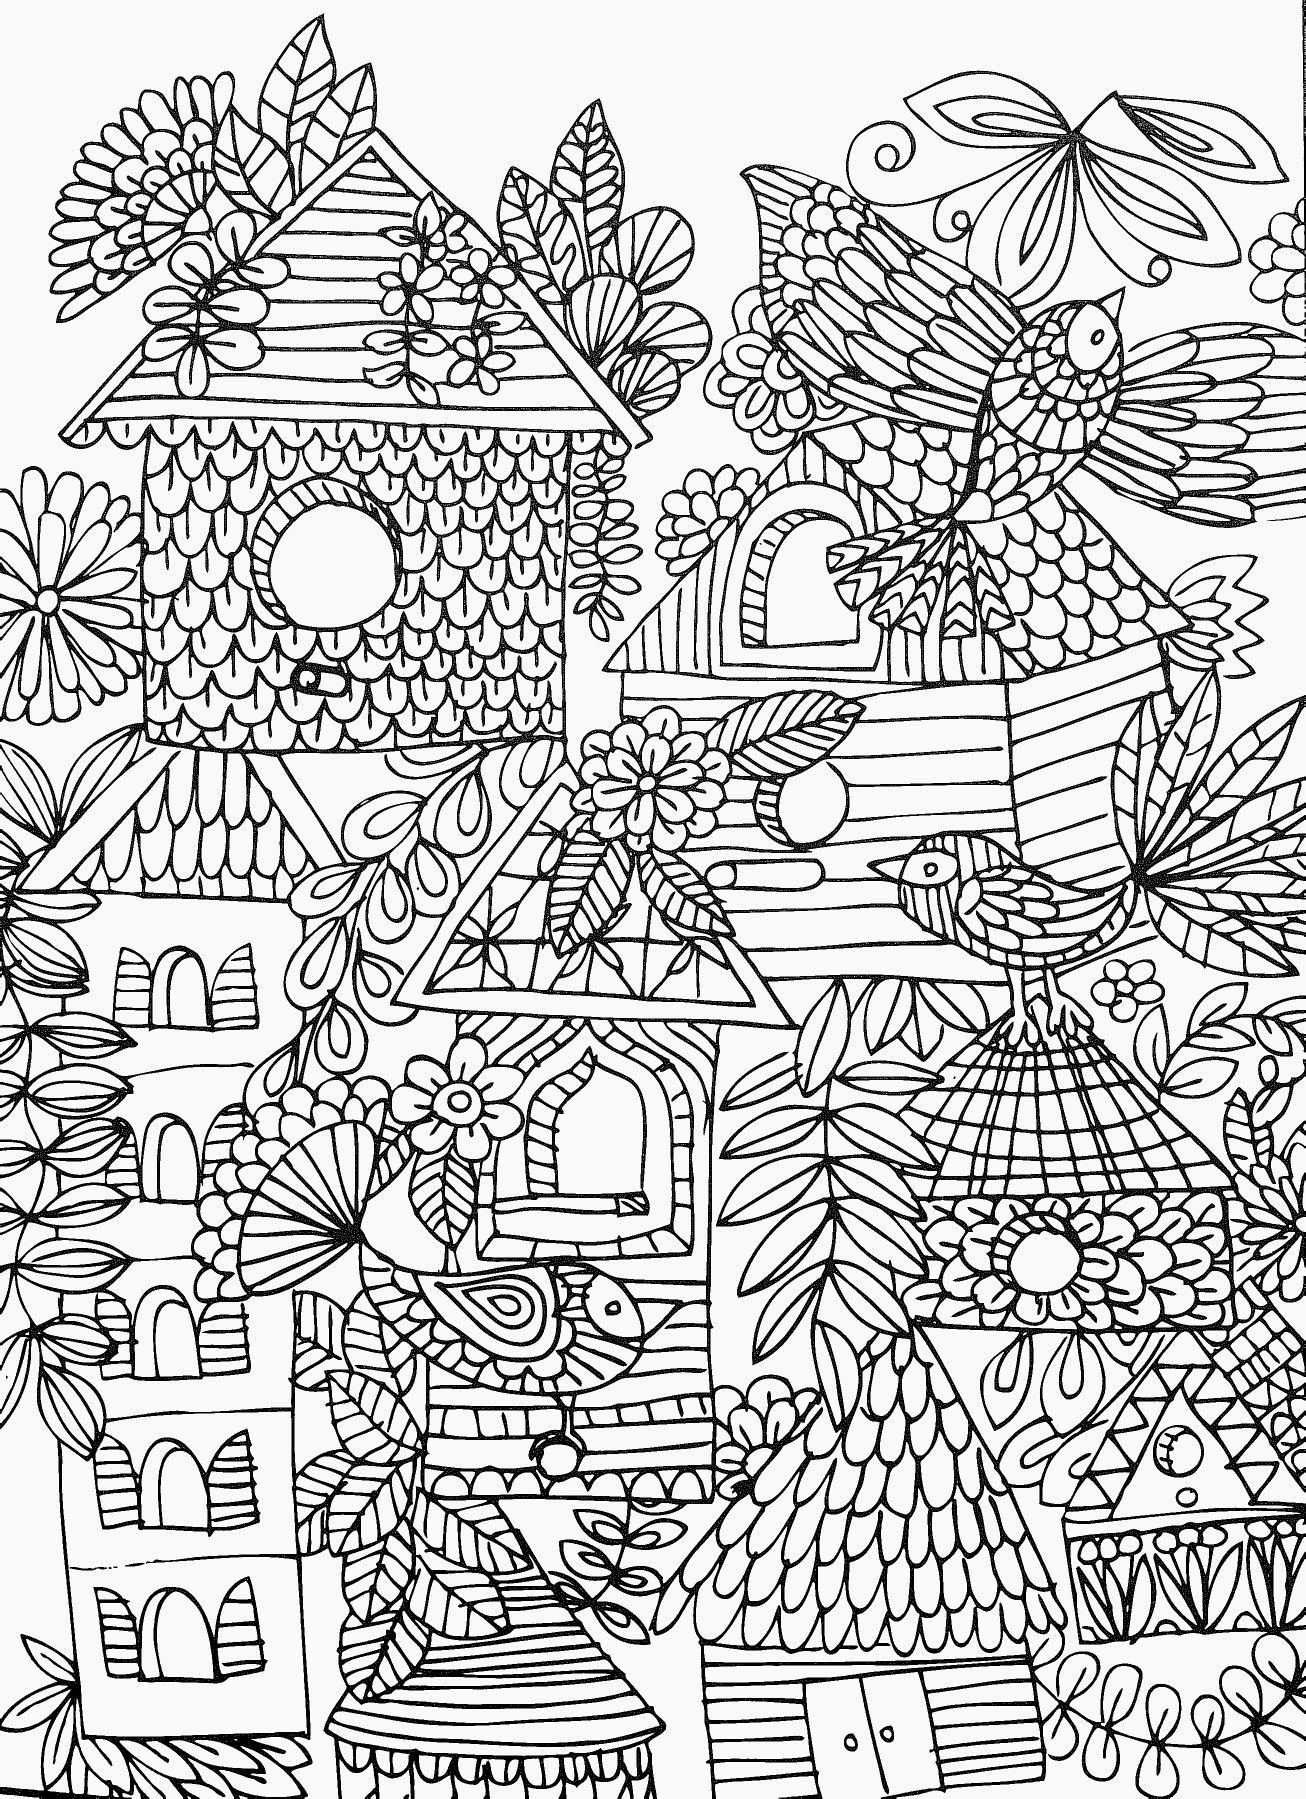 Fun funky birds birdhouses adult coloring page abstract whimsical unique coloring pages unique coloring pages abstract coloring pages